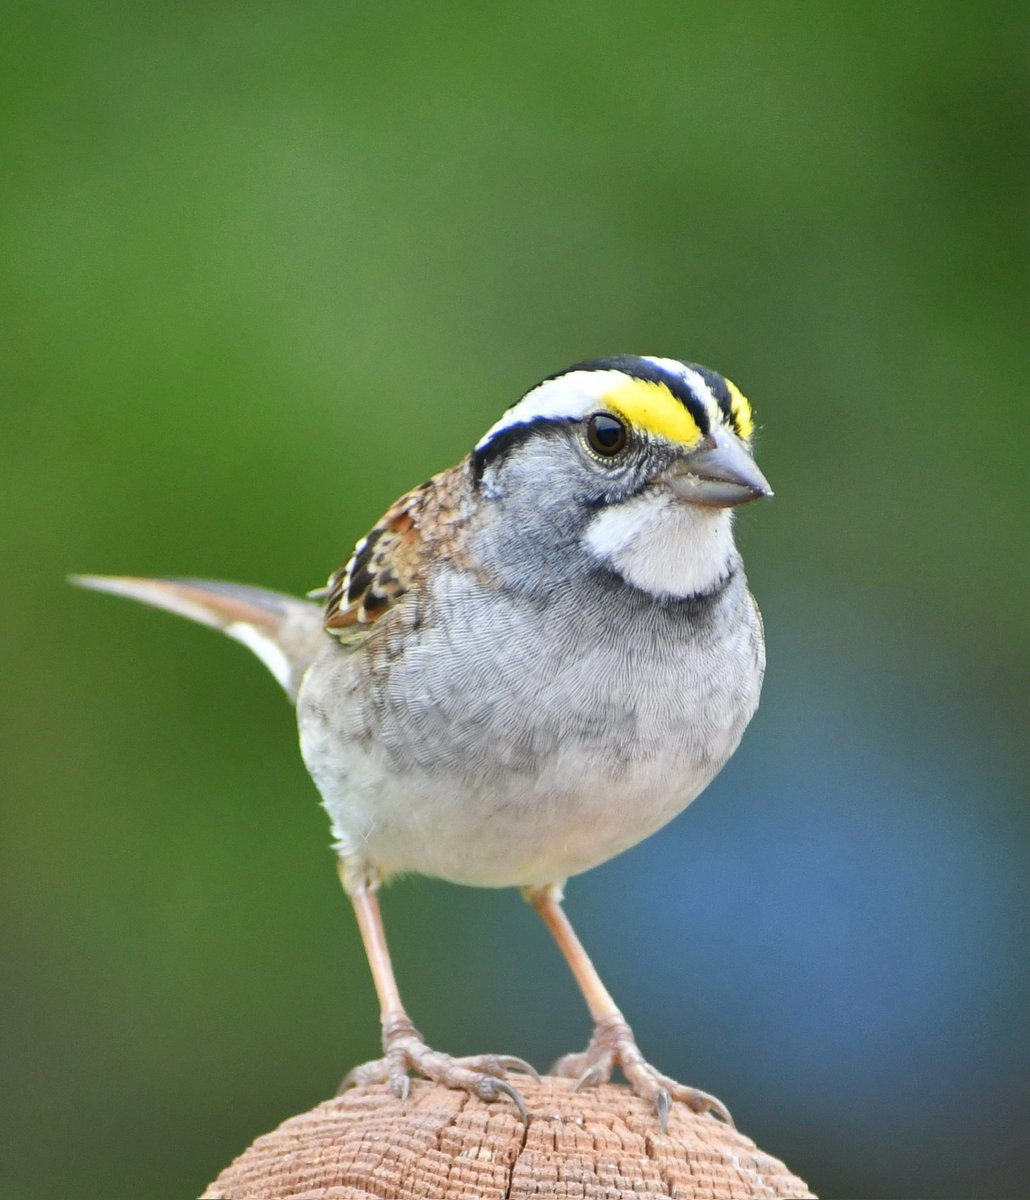 White-throated Sparrow 
#birdphotography